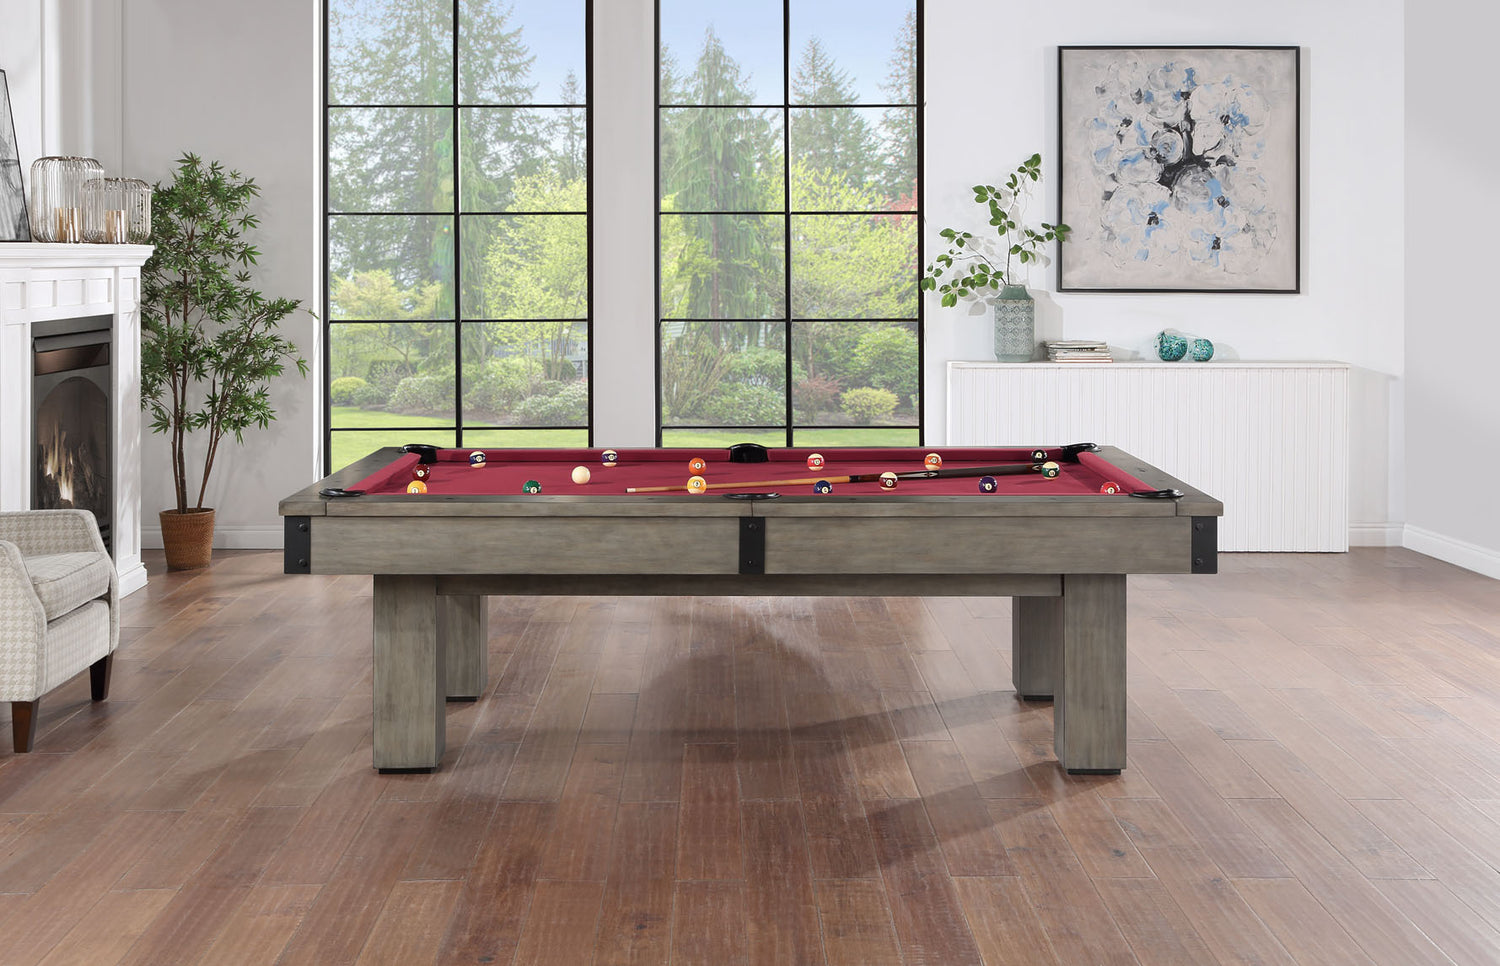 Legacy Billiards Colt II Pool Table in Overcast Finish with Legacy Red Cloth Modern Room Scene - Side View